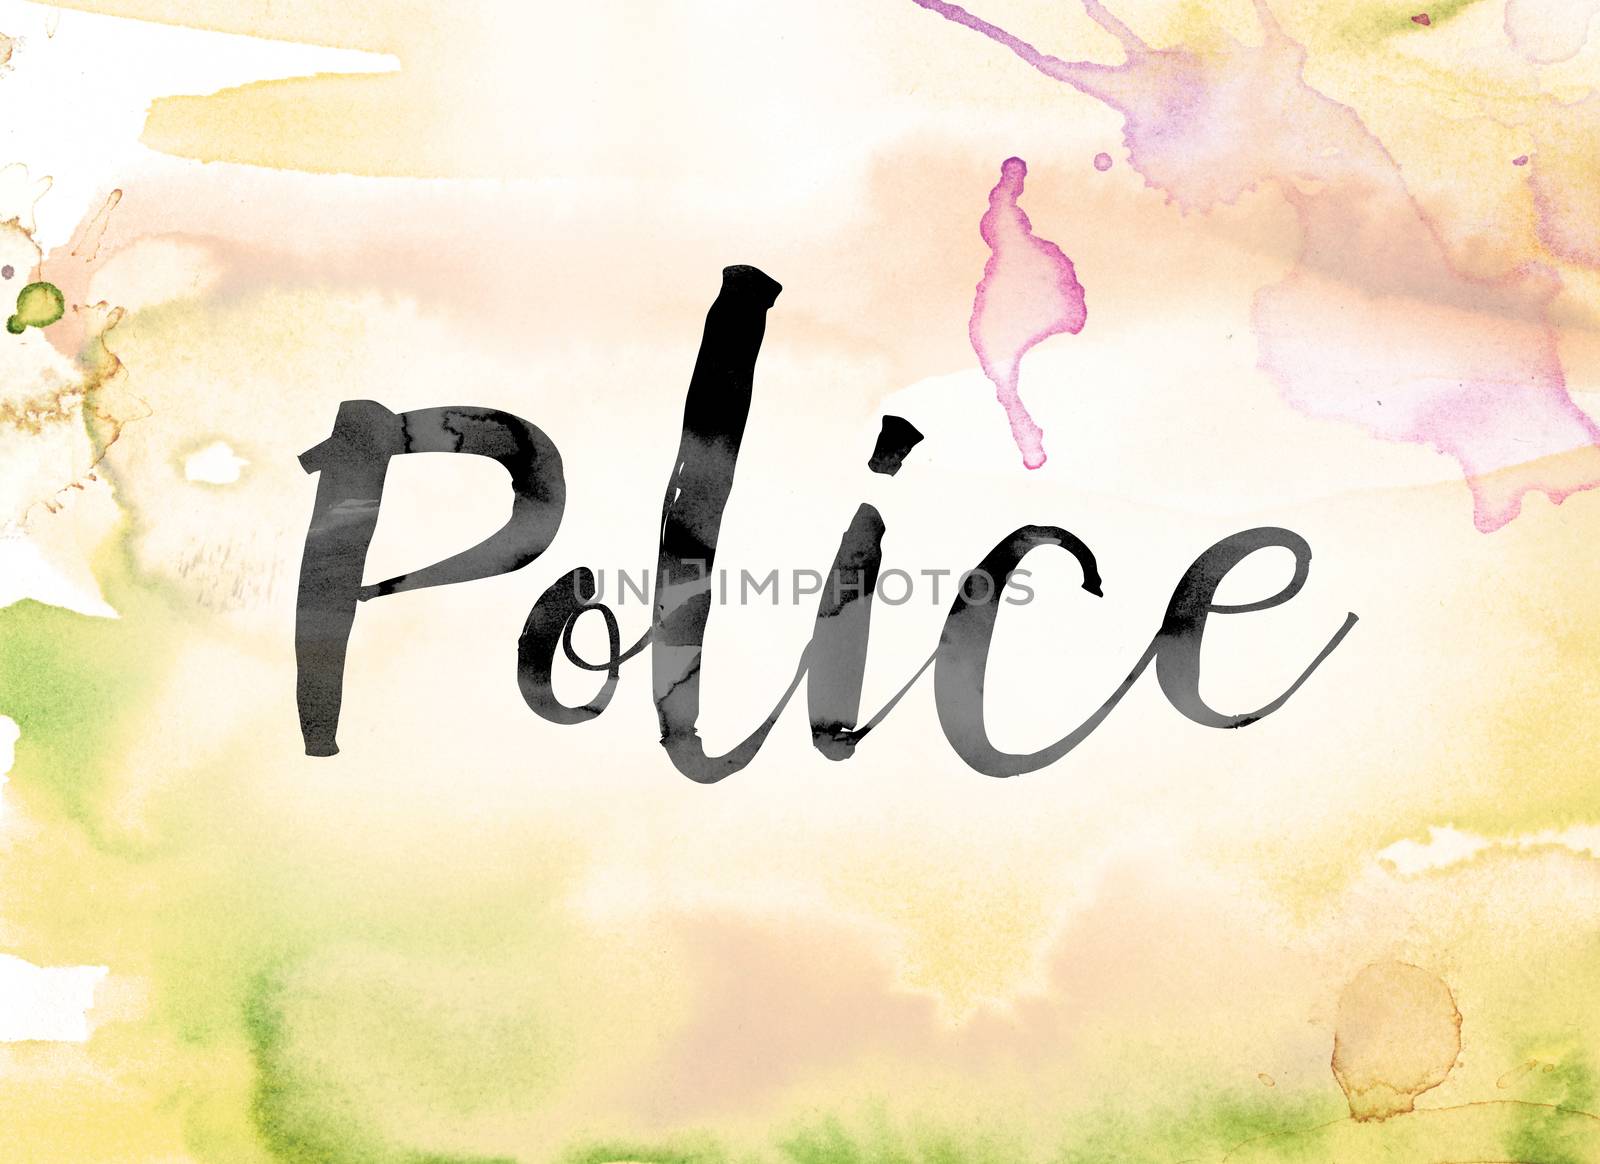 The word "Police" painted in black ink over a colorful watercolor washed background concept and theme.